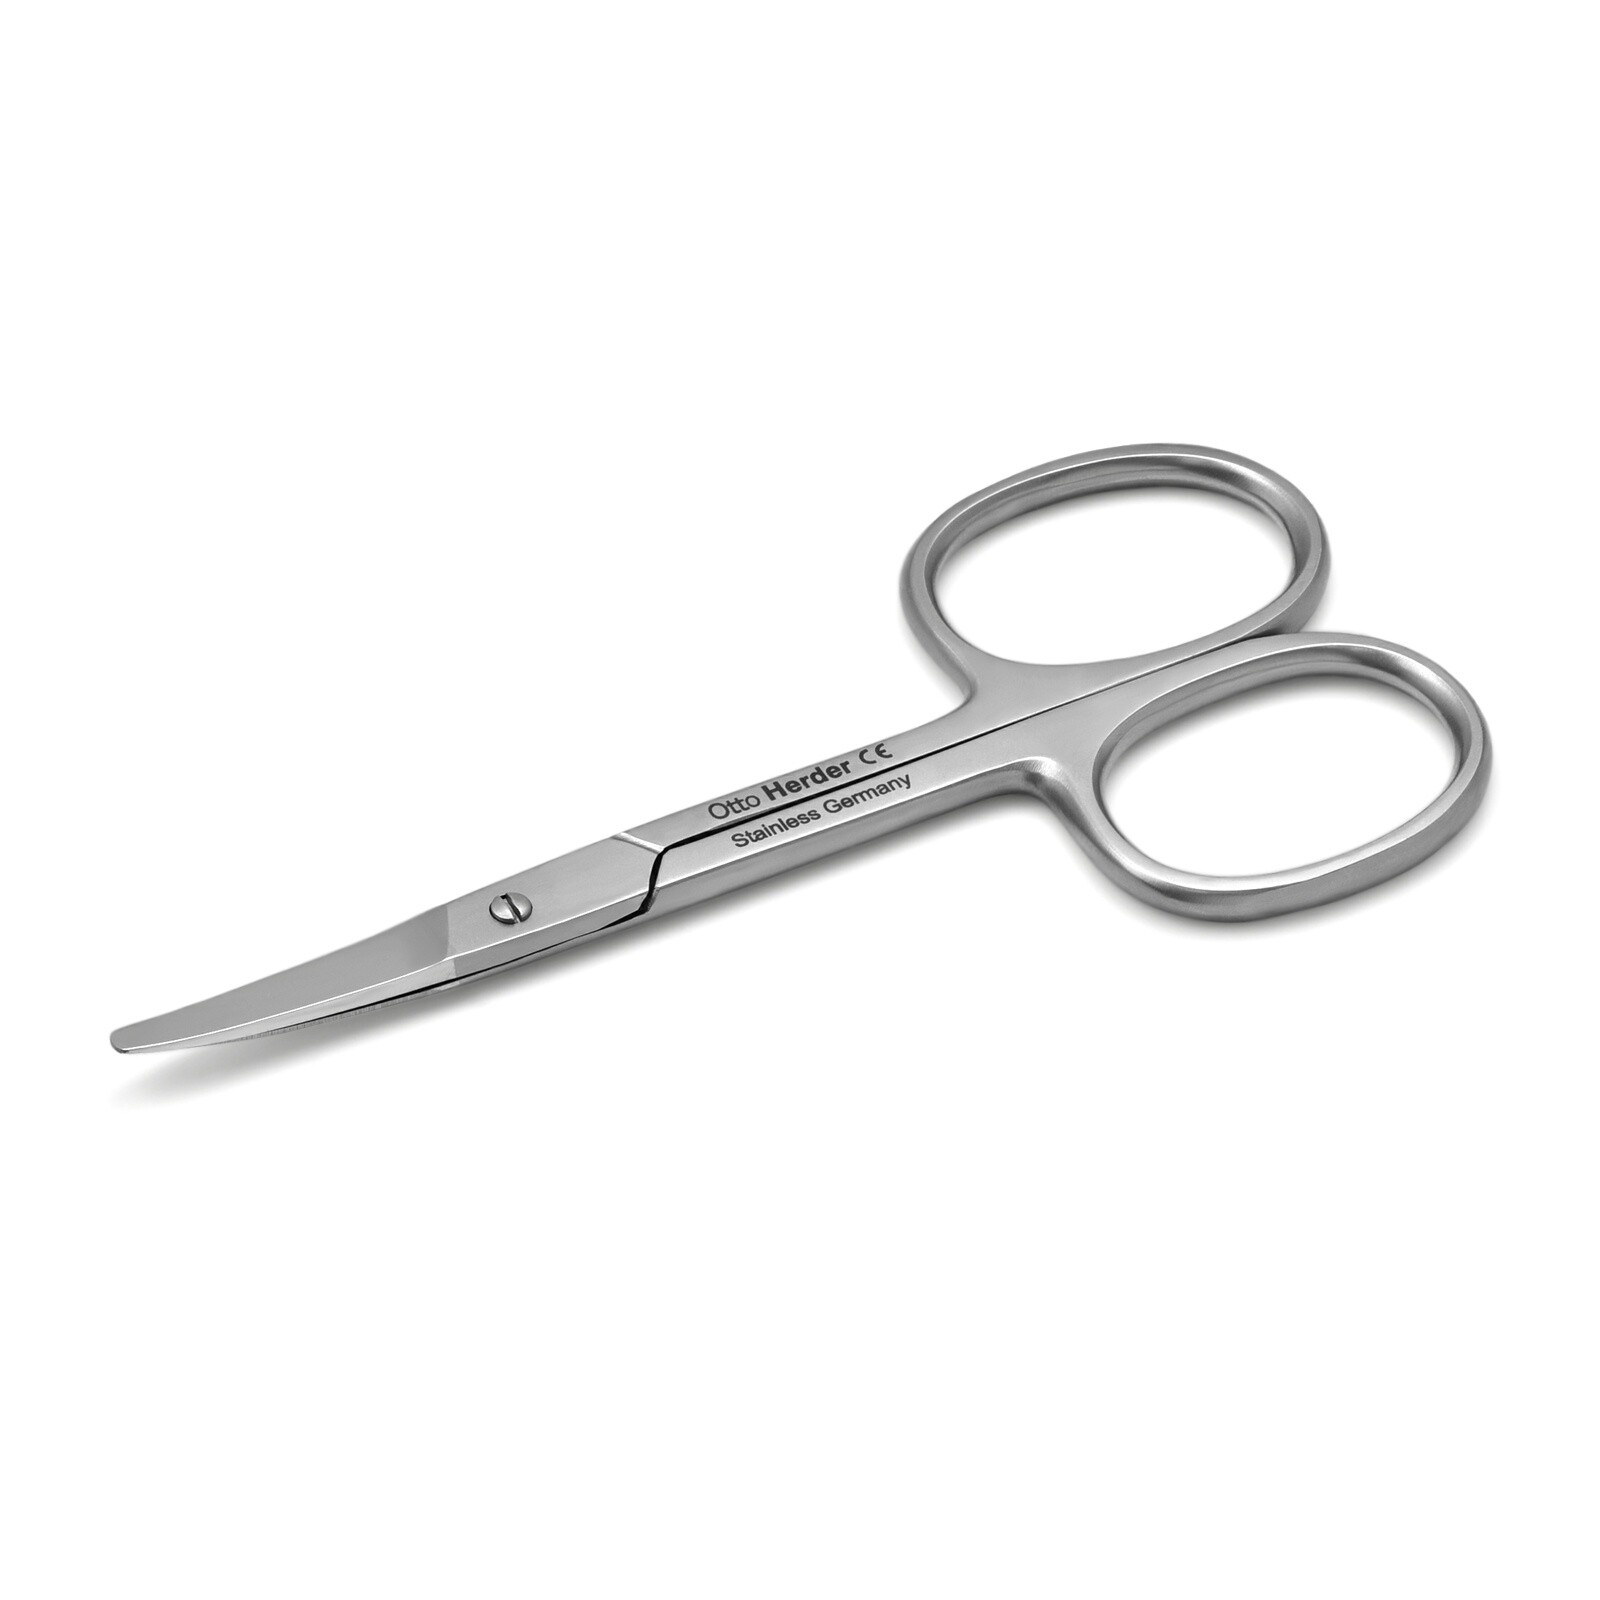 Reer Baby Nail Scissors - Stainless Steel » ASAP Shipping